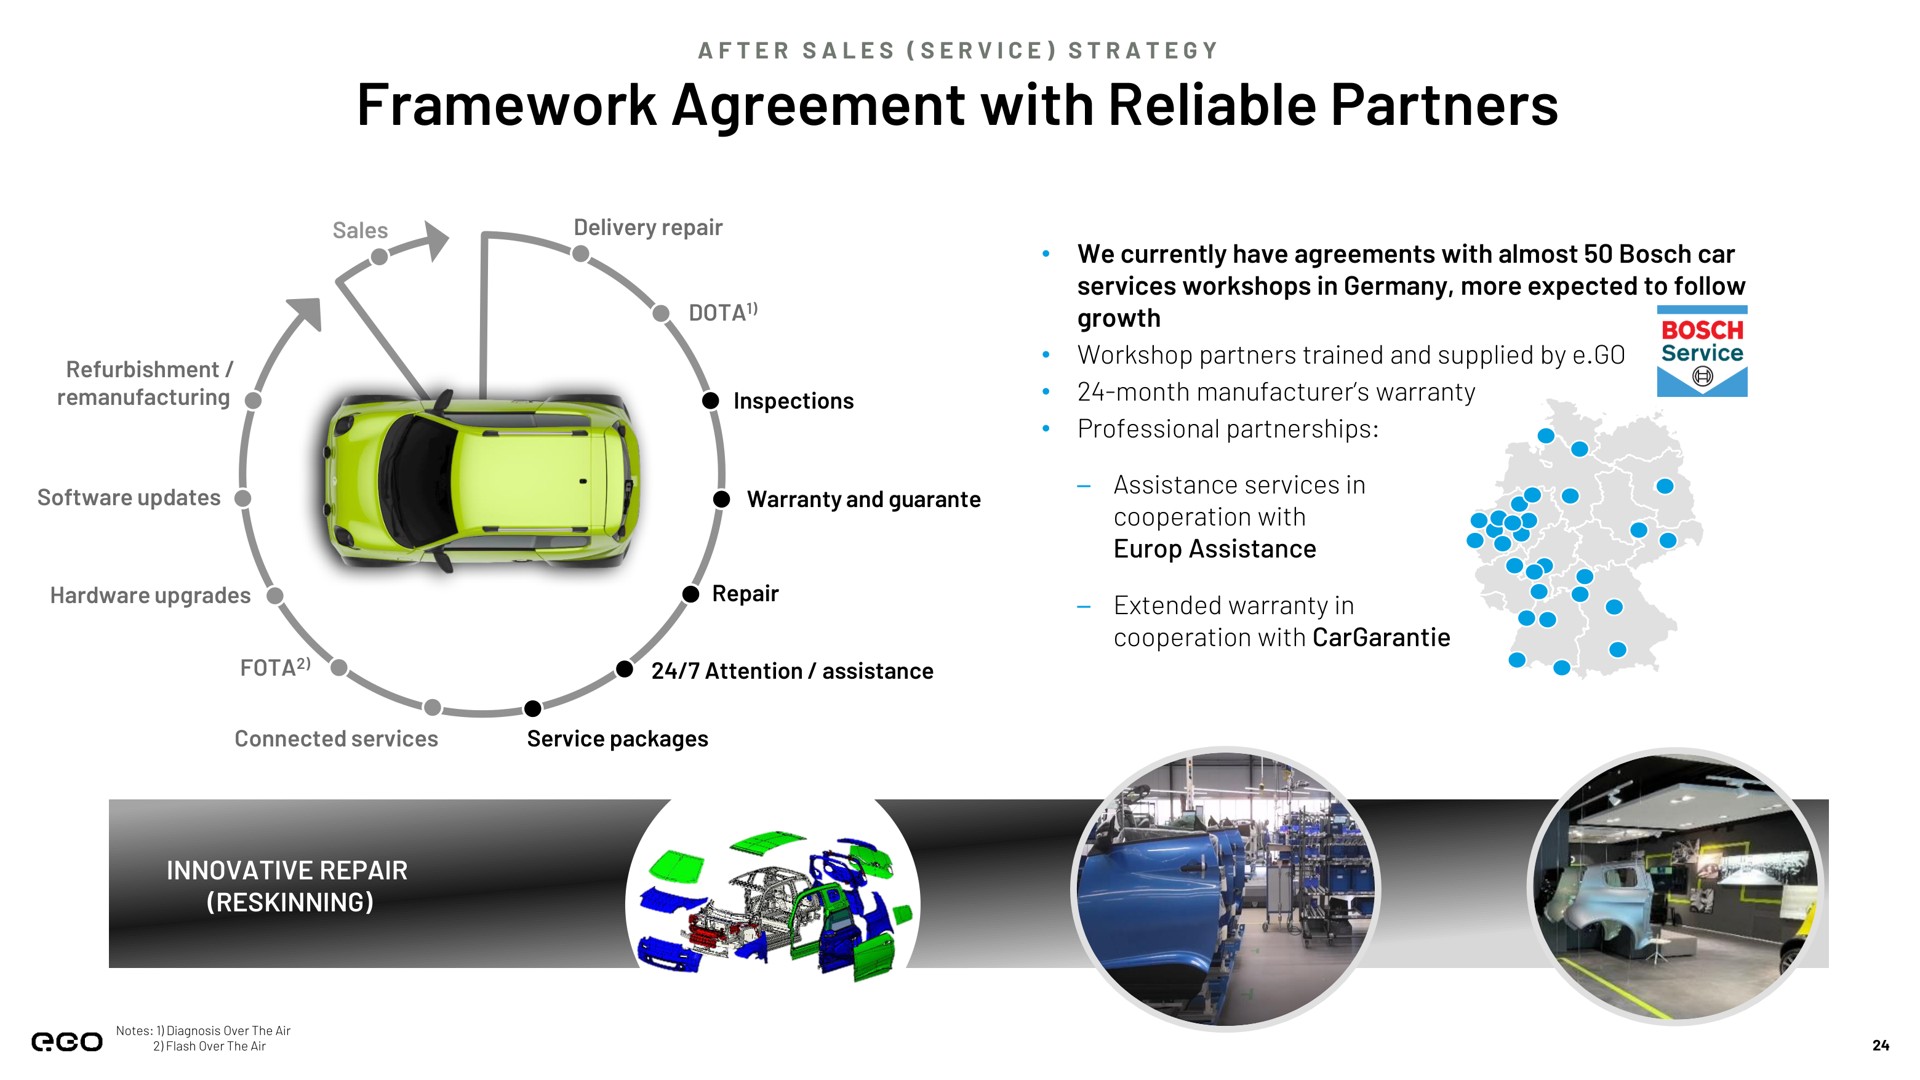 framework agreement with reliable partners see | Next.e.GO